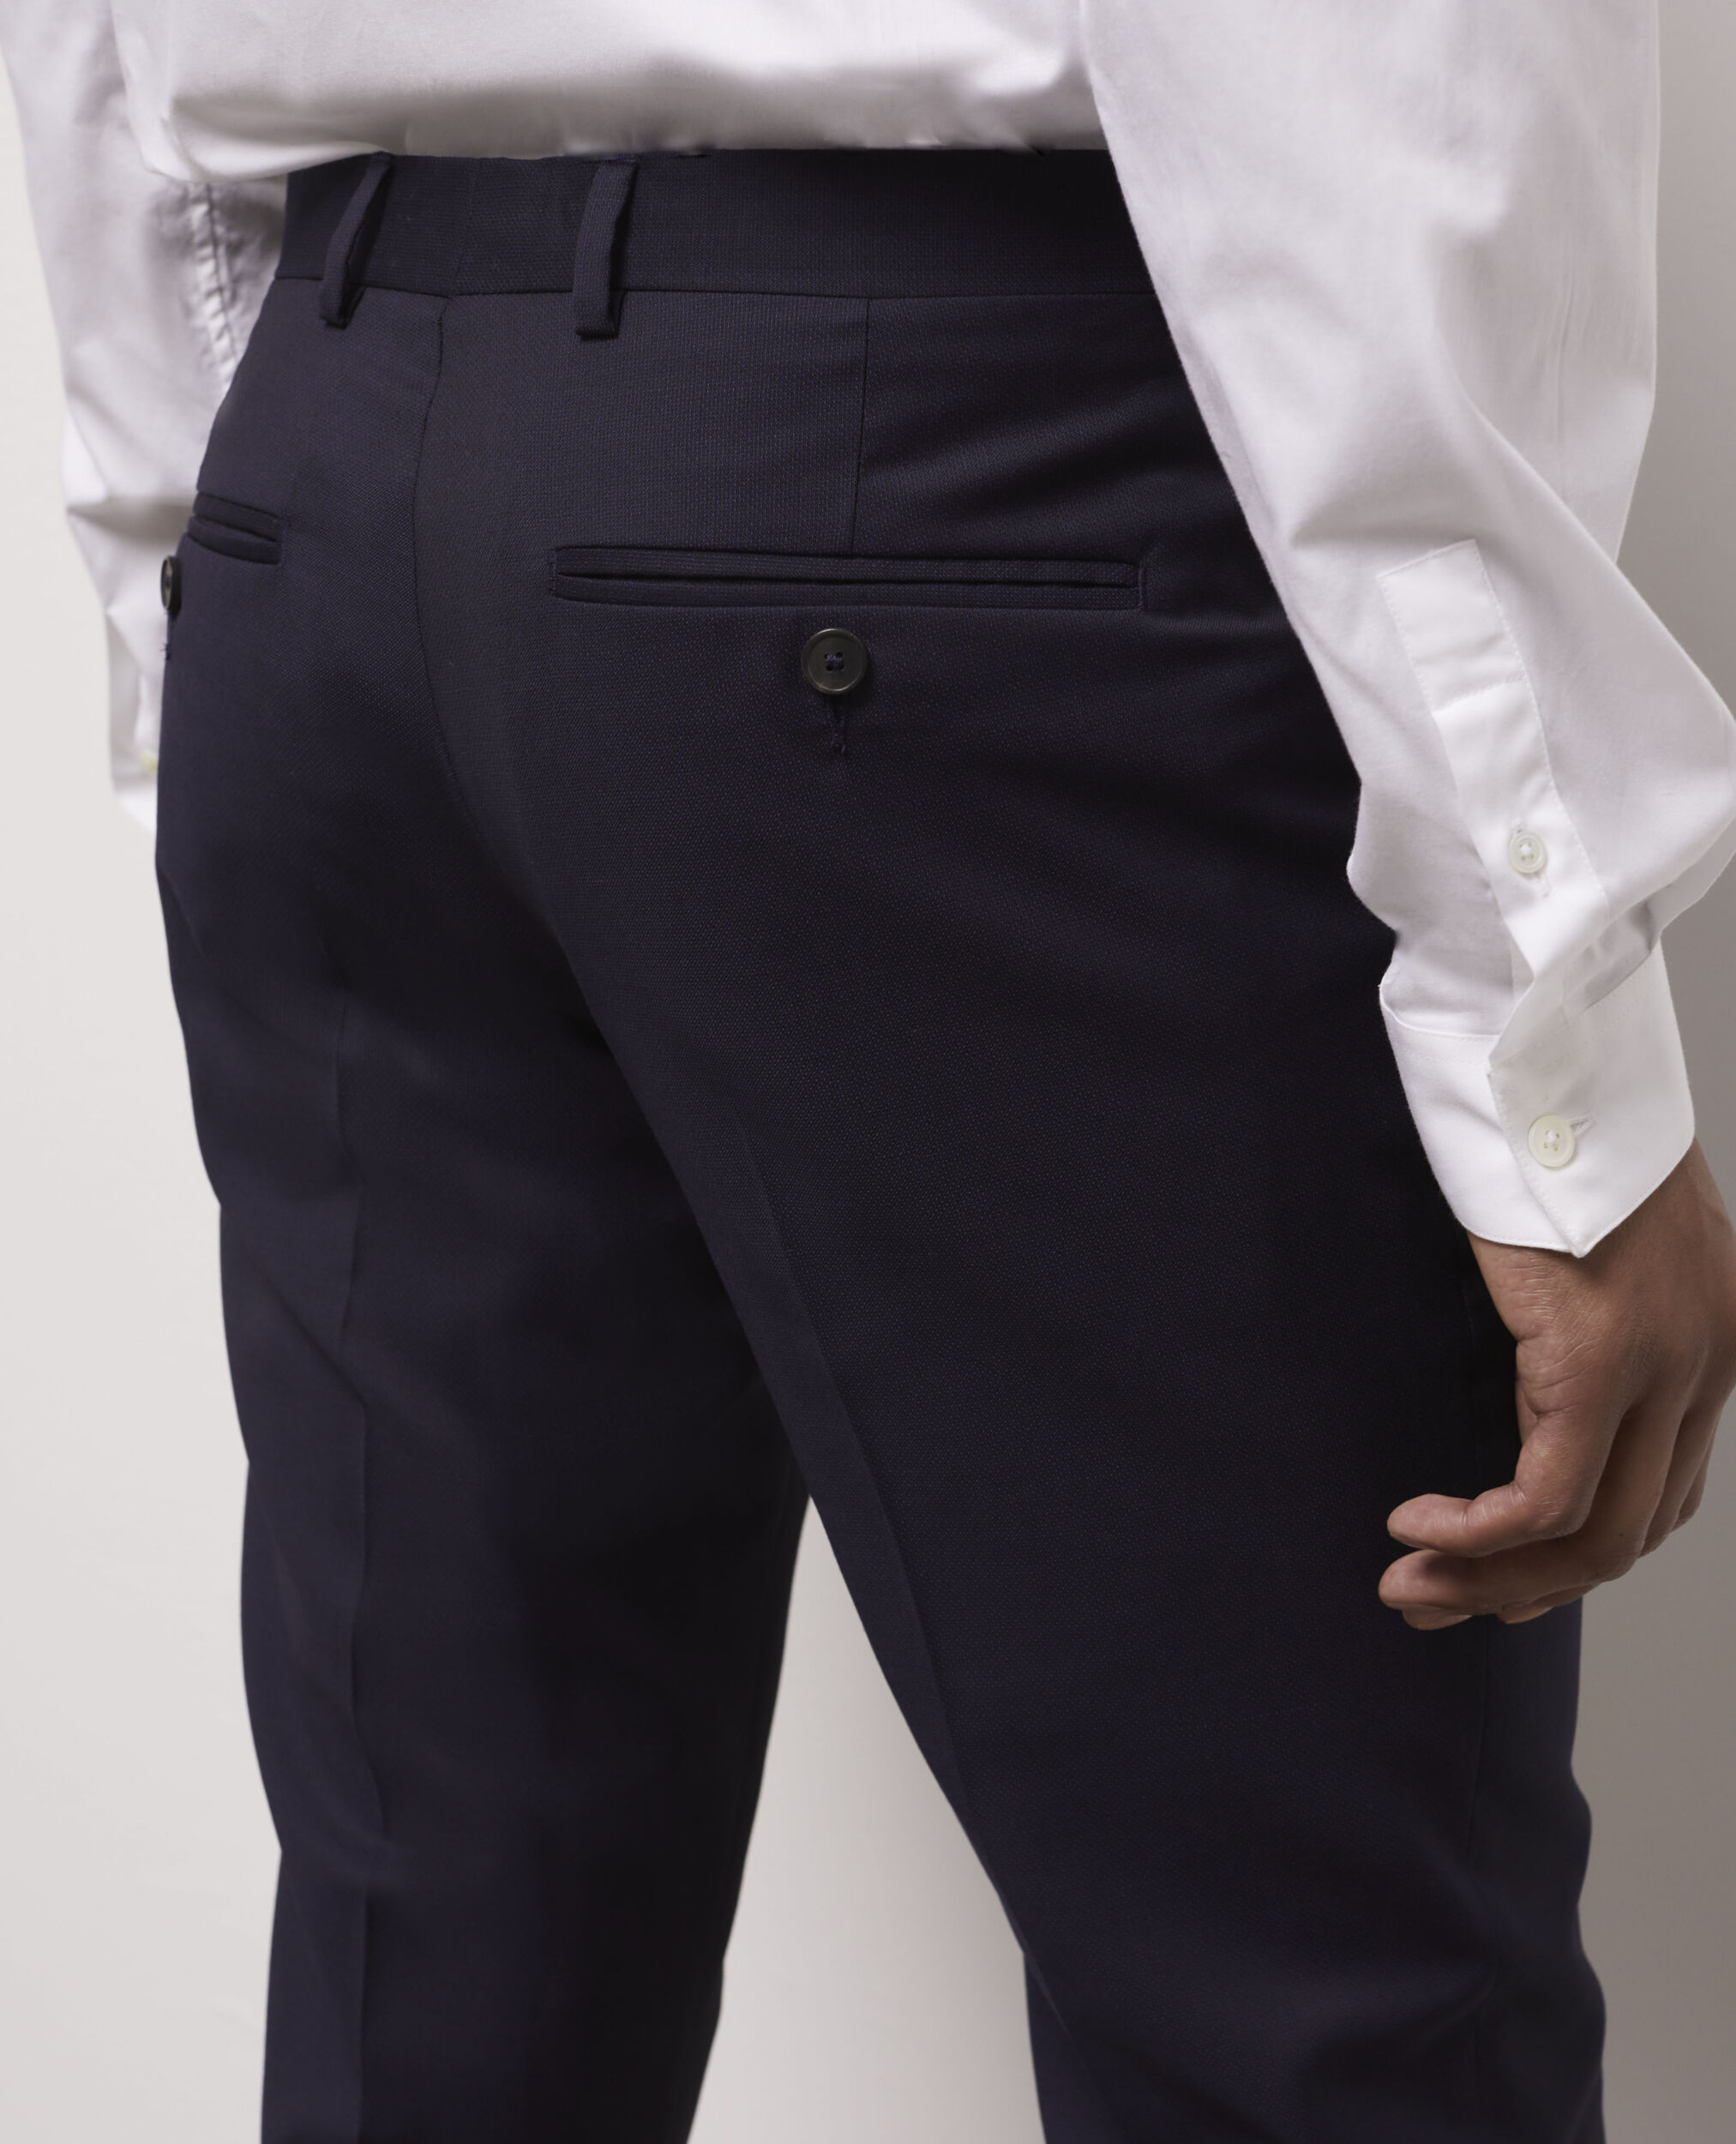 Navy blue suit pants, NAVY, hi-res image number null